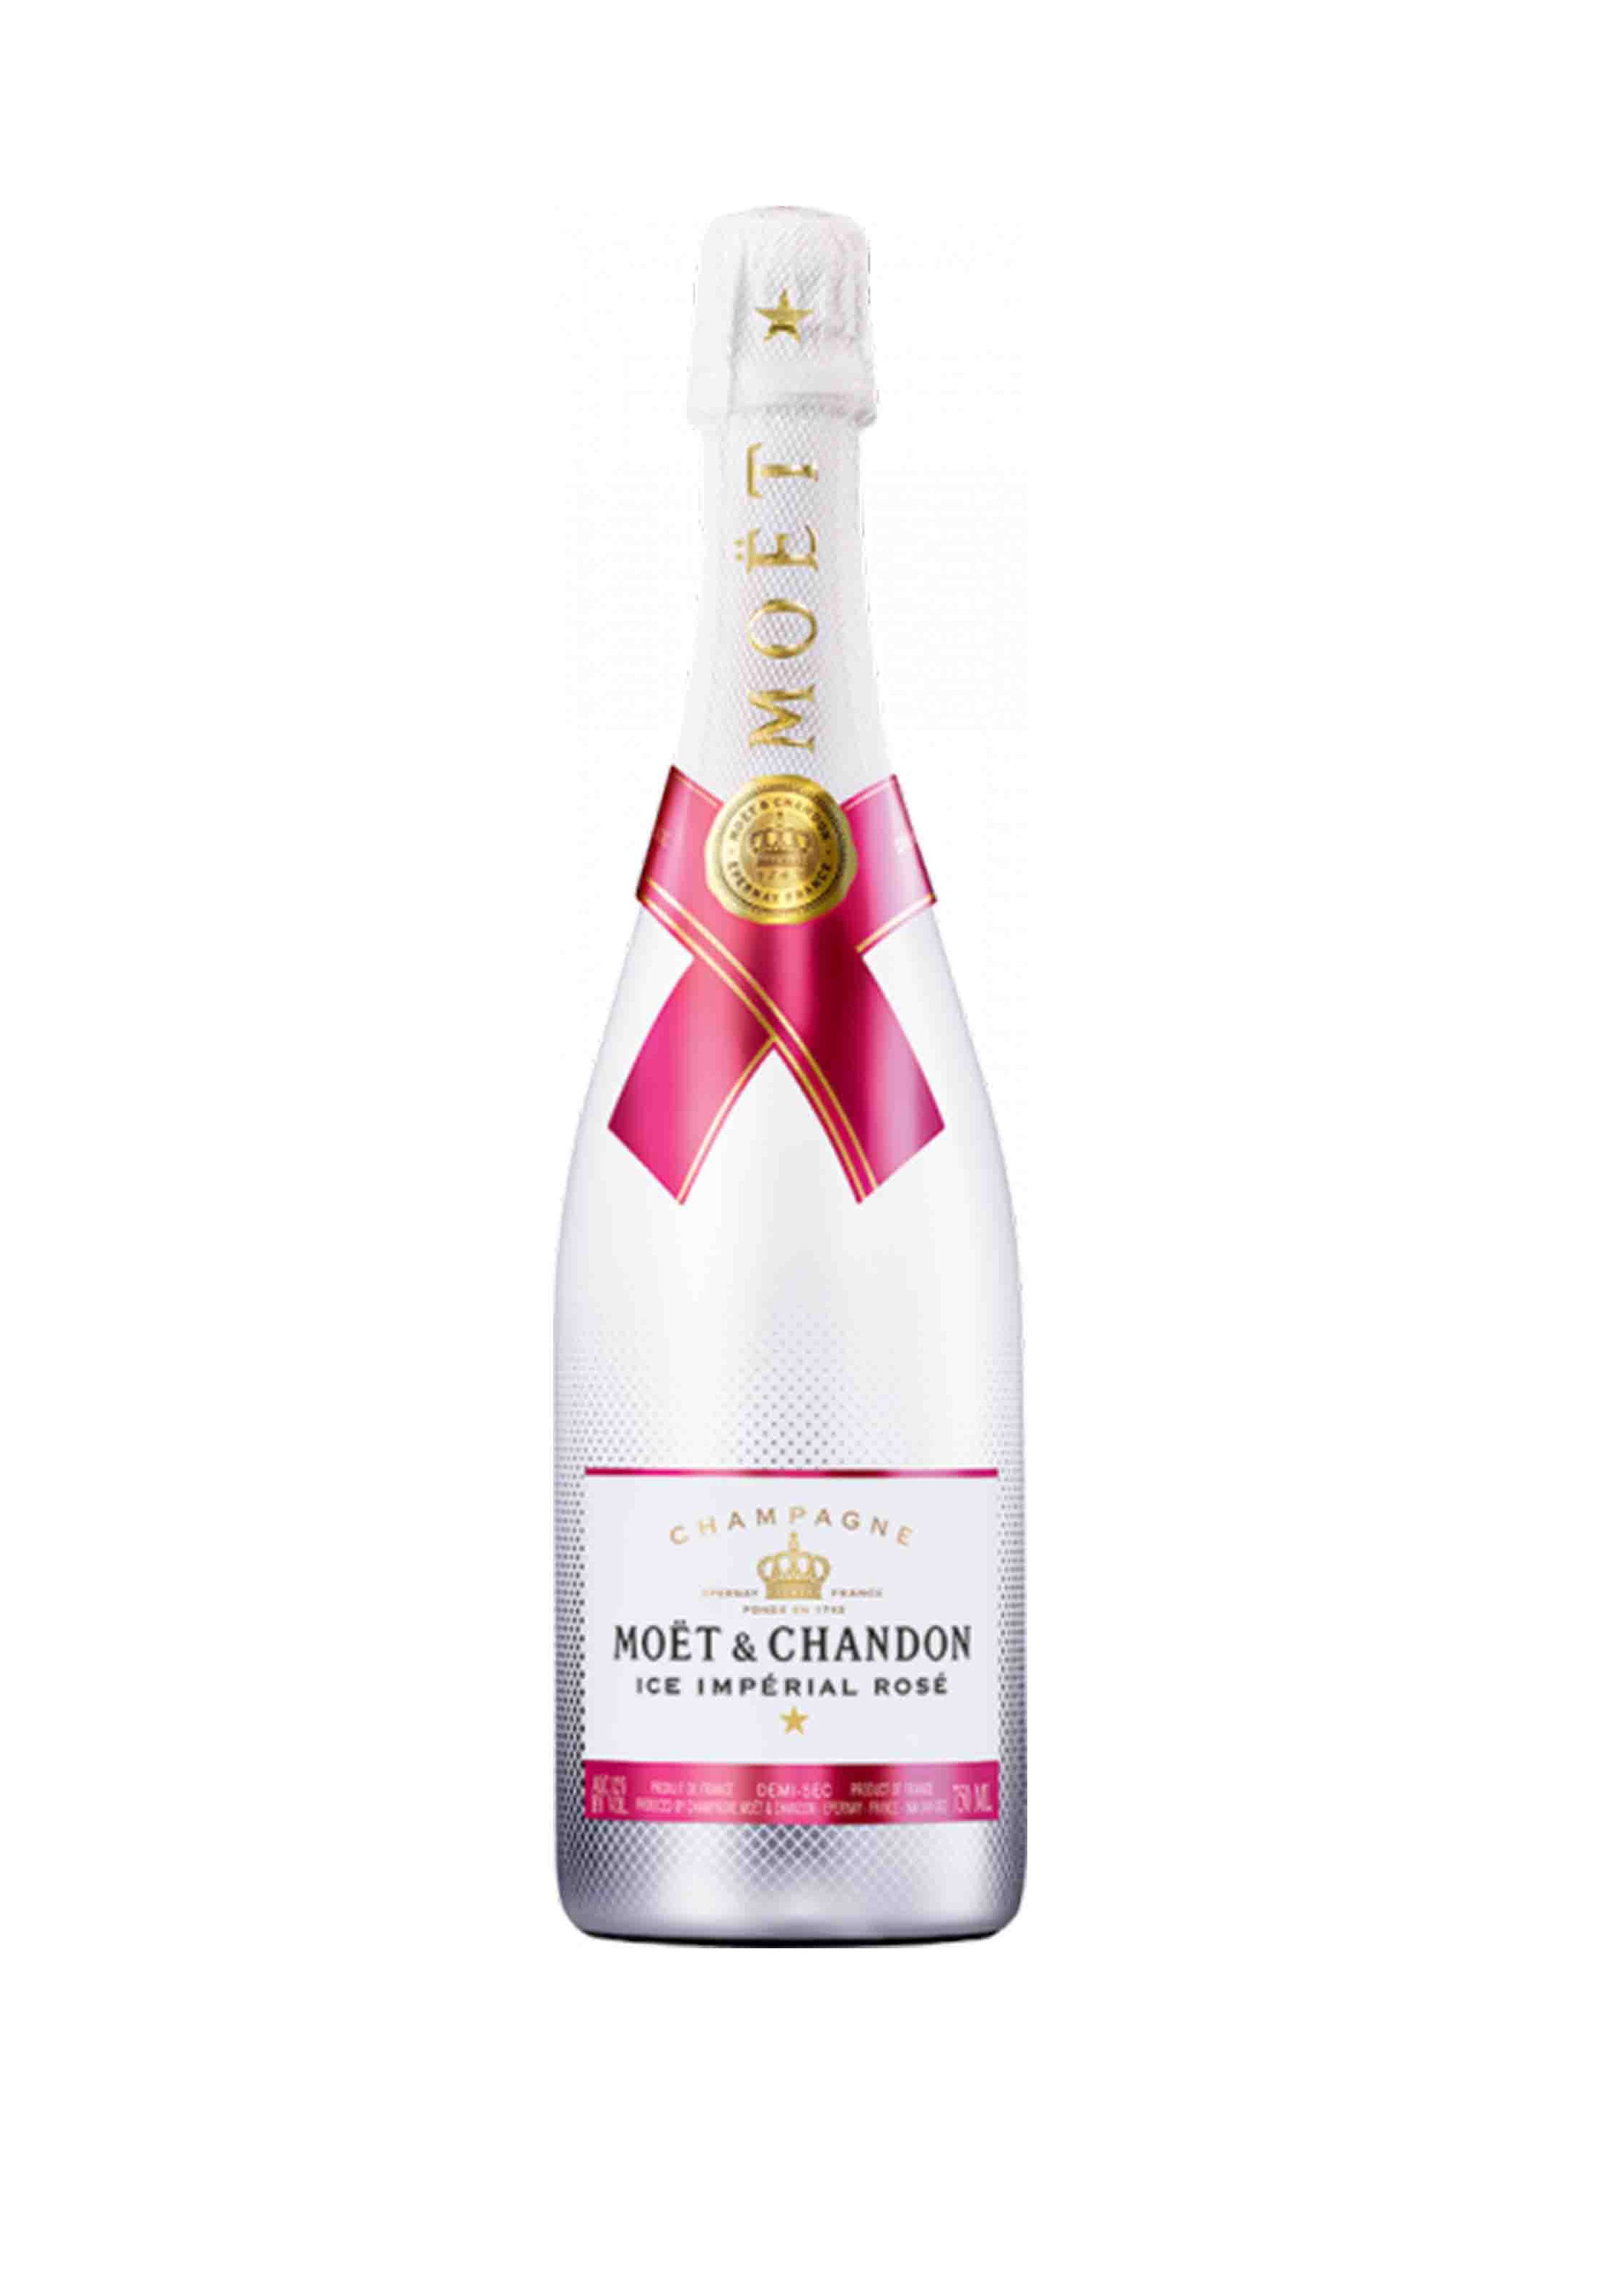 champagne moet ice imperial rose